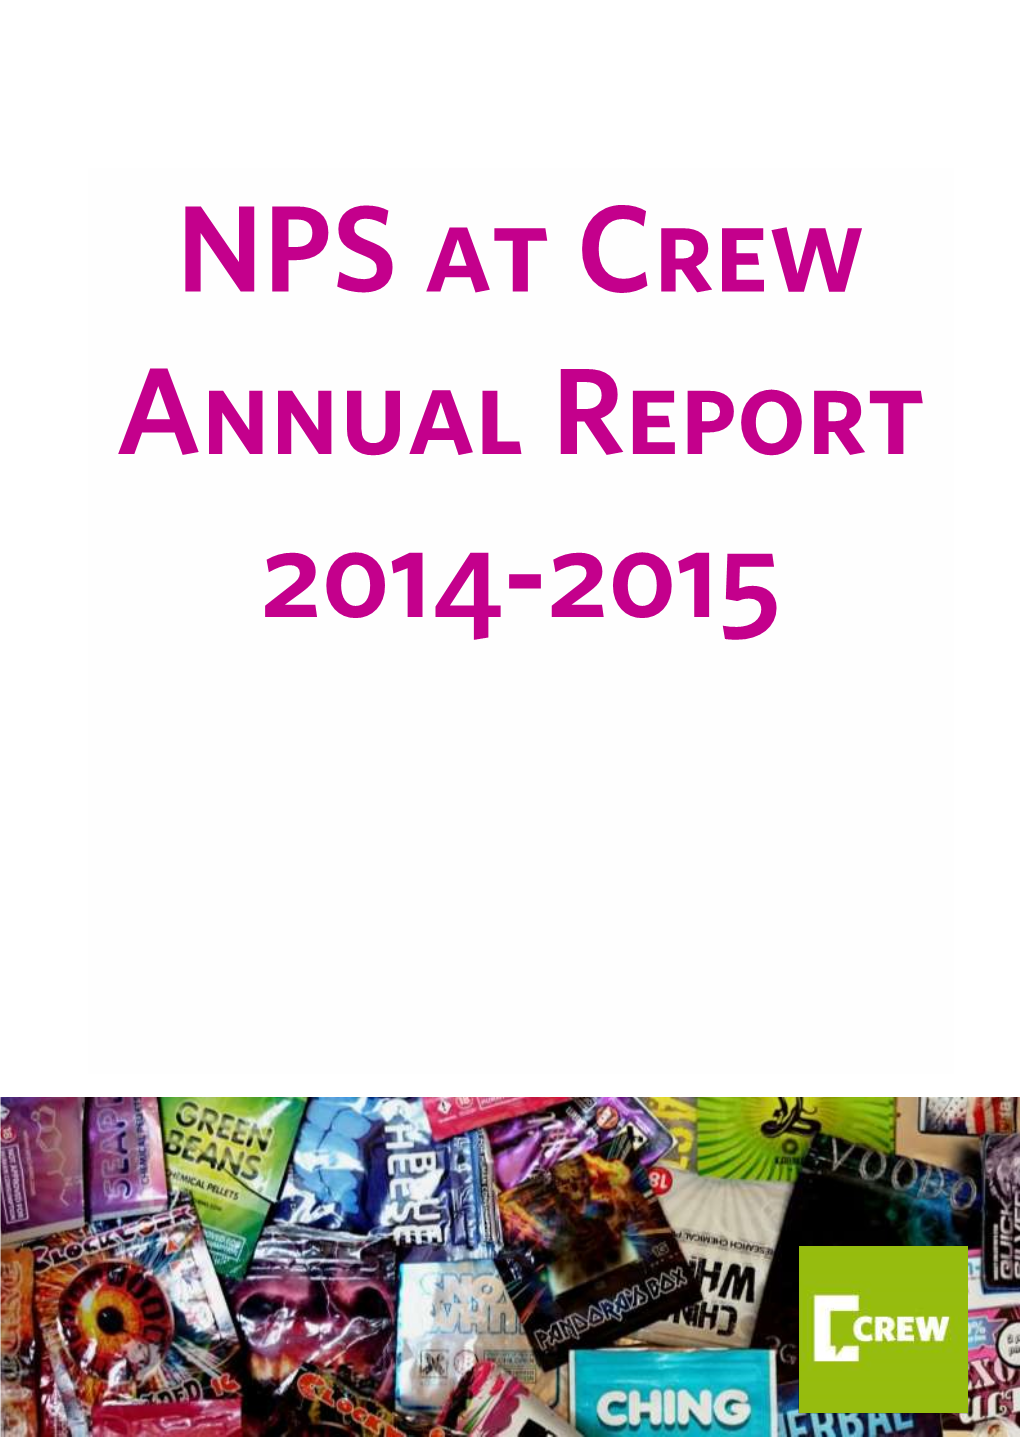 NPS at Crew, Annual Report, 2014-2015